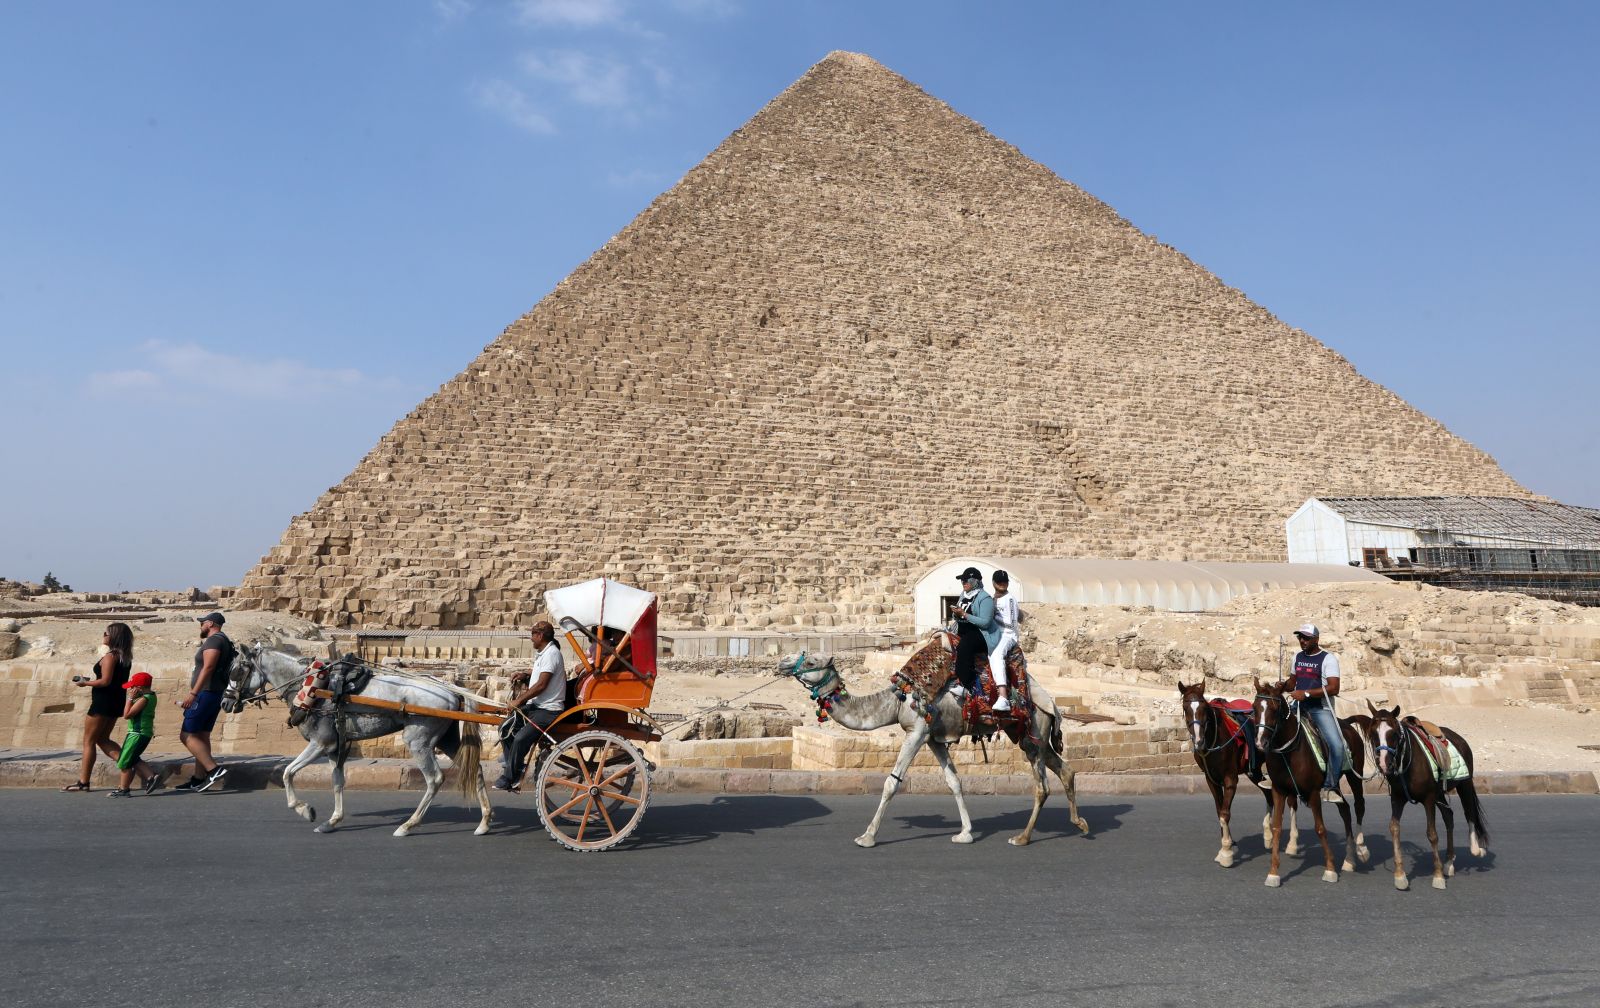 epa09502835 People ride camels past the pyramids in Giza, Egypt, 02 October 2021  EPA/KHALED ELFIQI